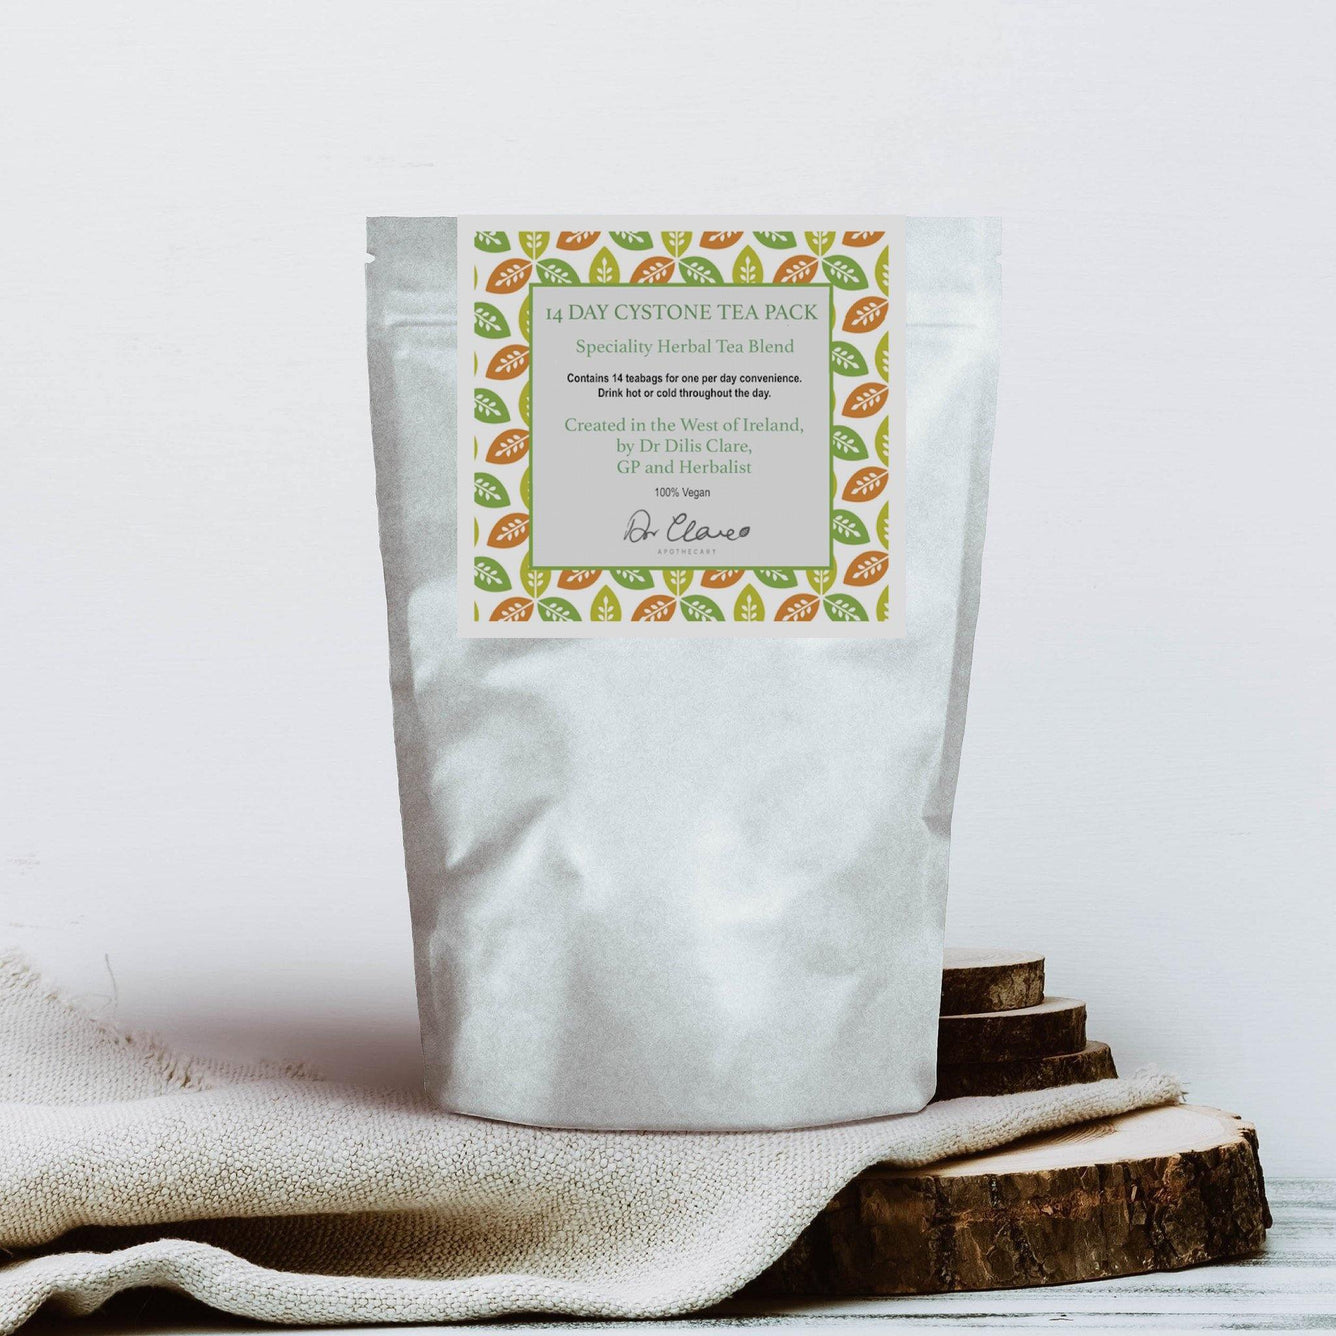 CYSTONE TEABAGS - DrClareApothecary